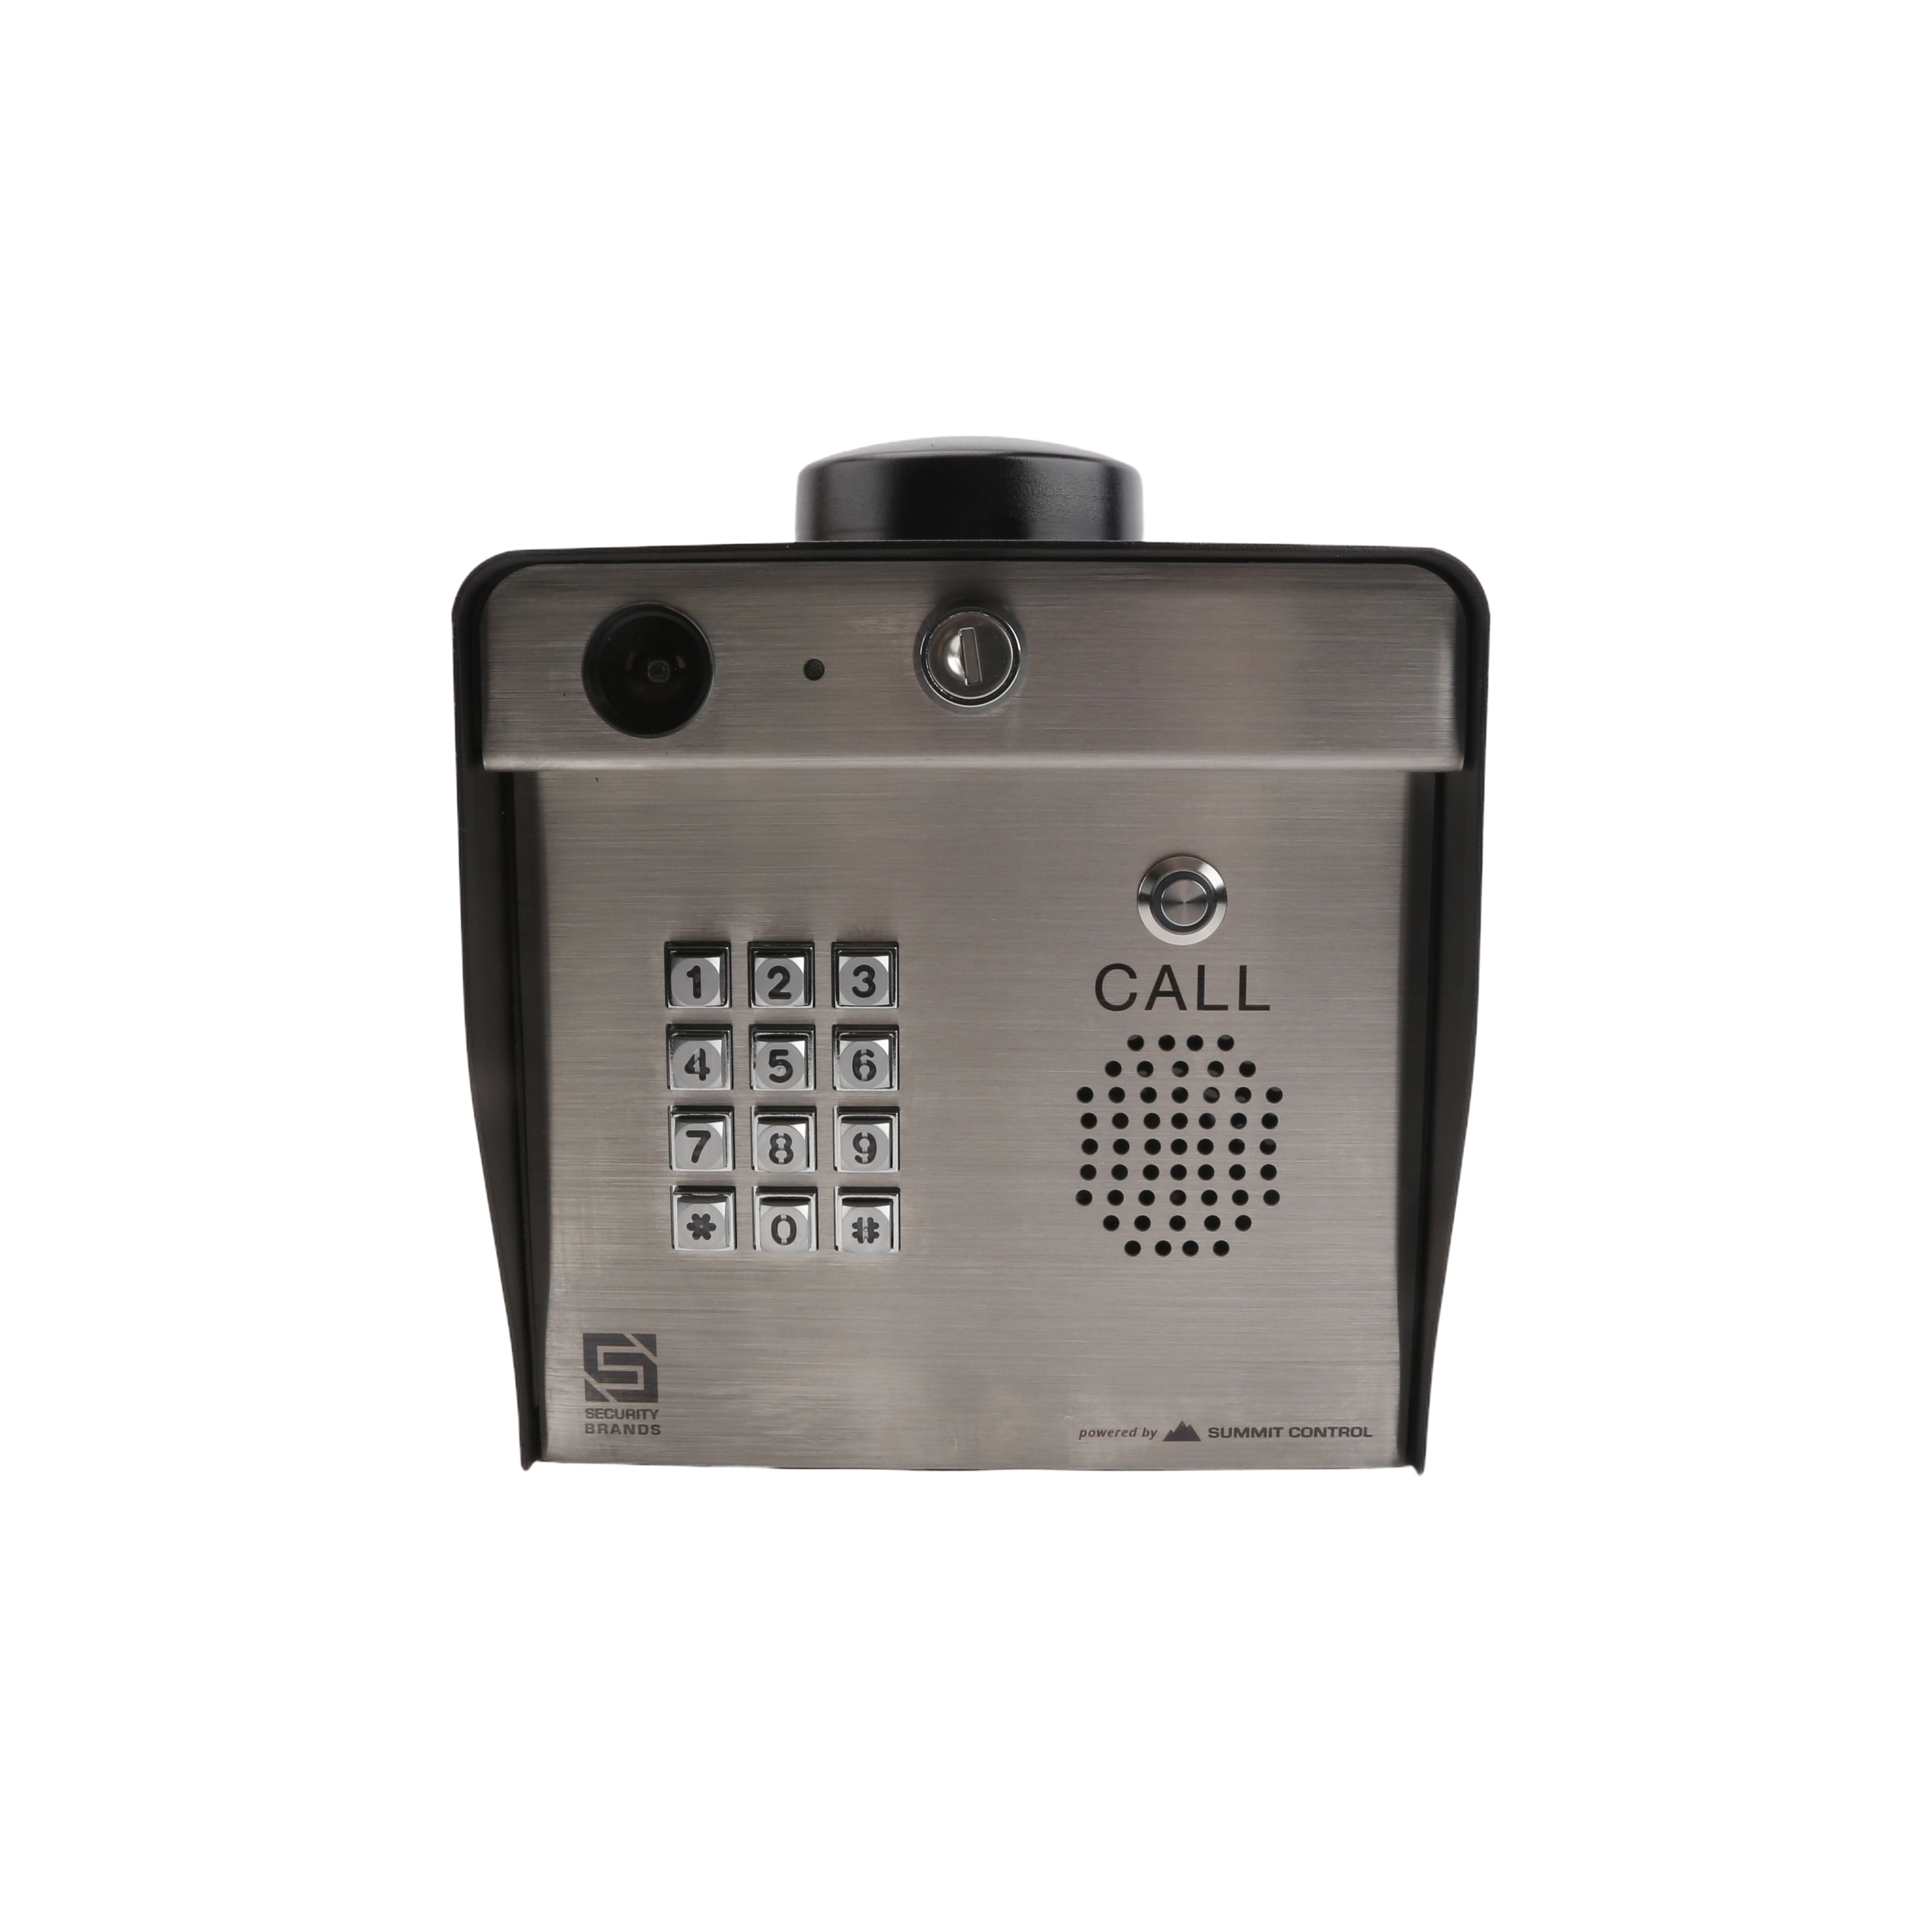 Summit Control Ascent X1 Cellular Telephone Entry System With Keypad, HD  Camera & 2 Wiegand Inputs - AAS 16-X1